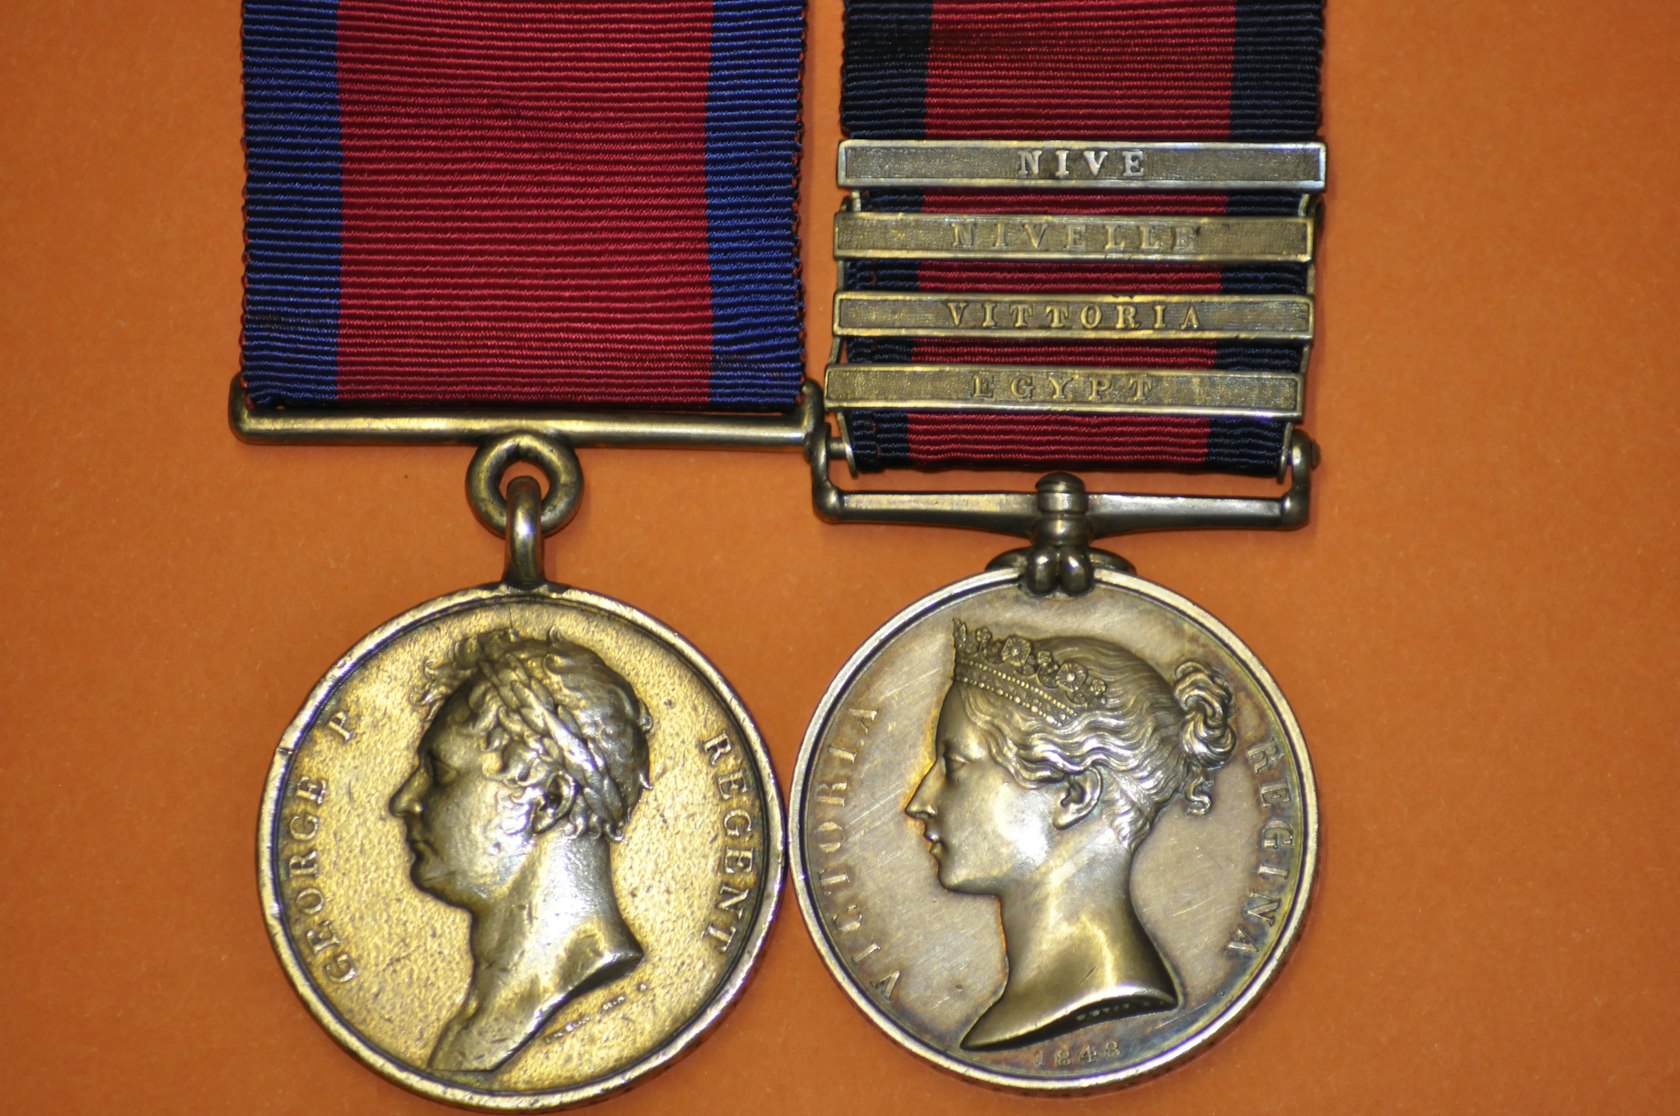 Griffith medals